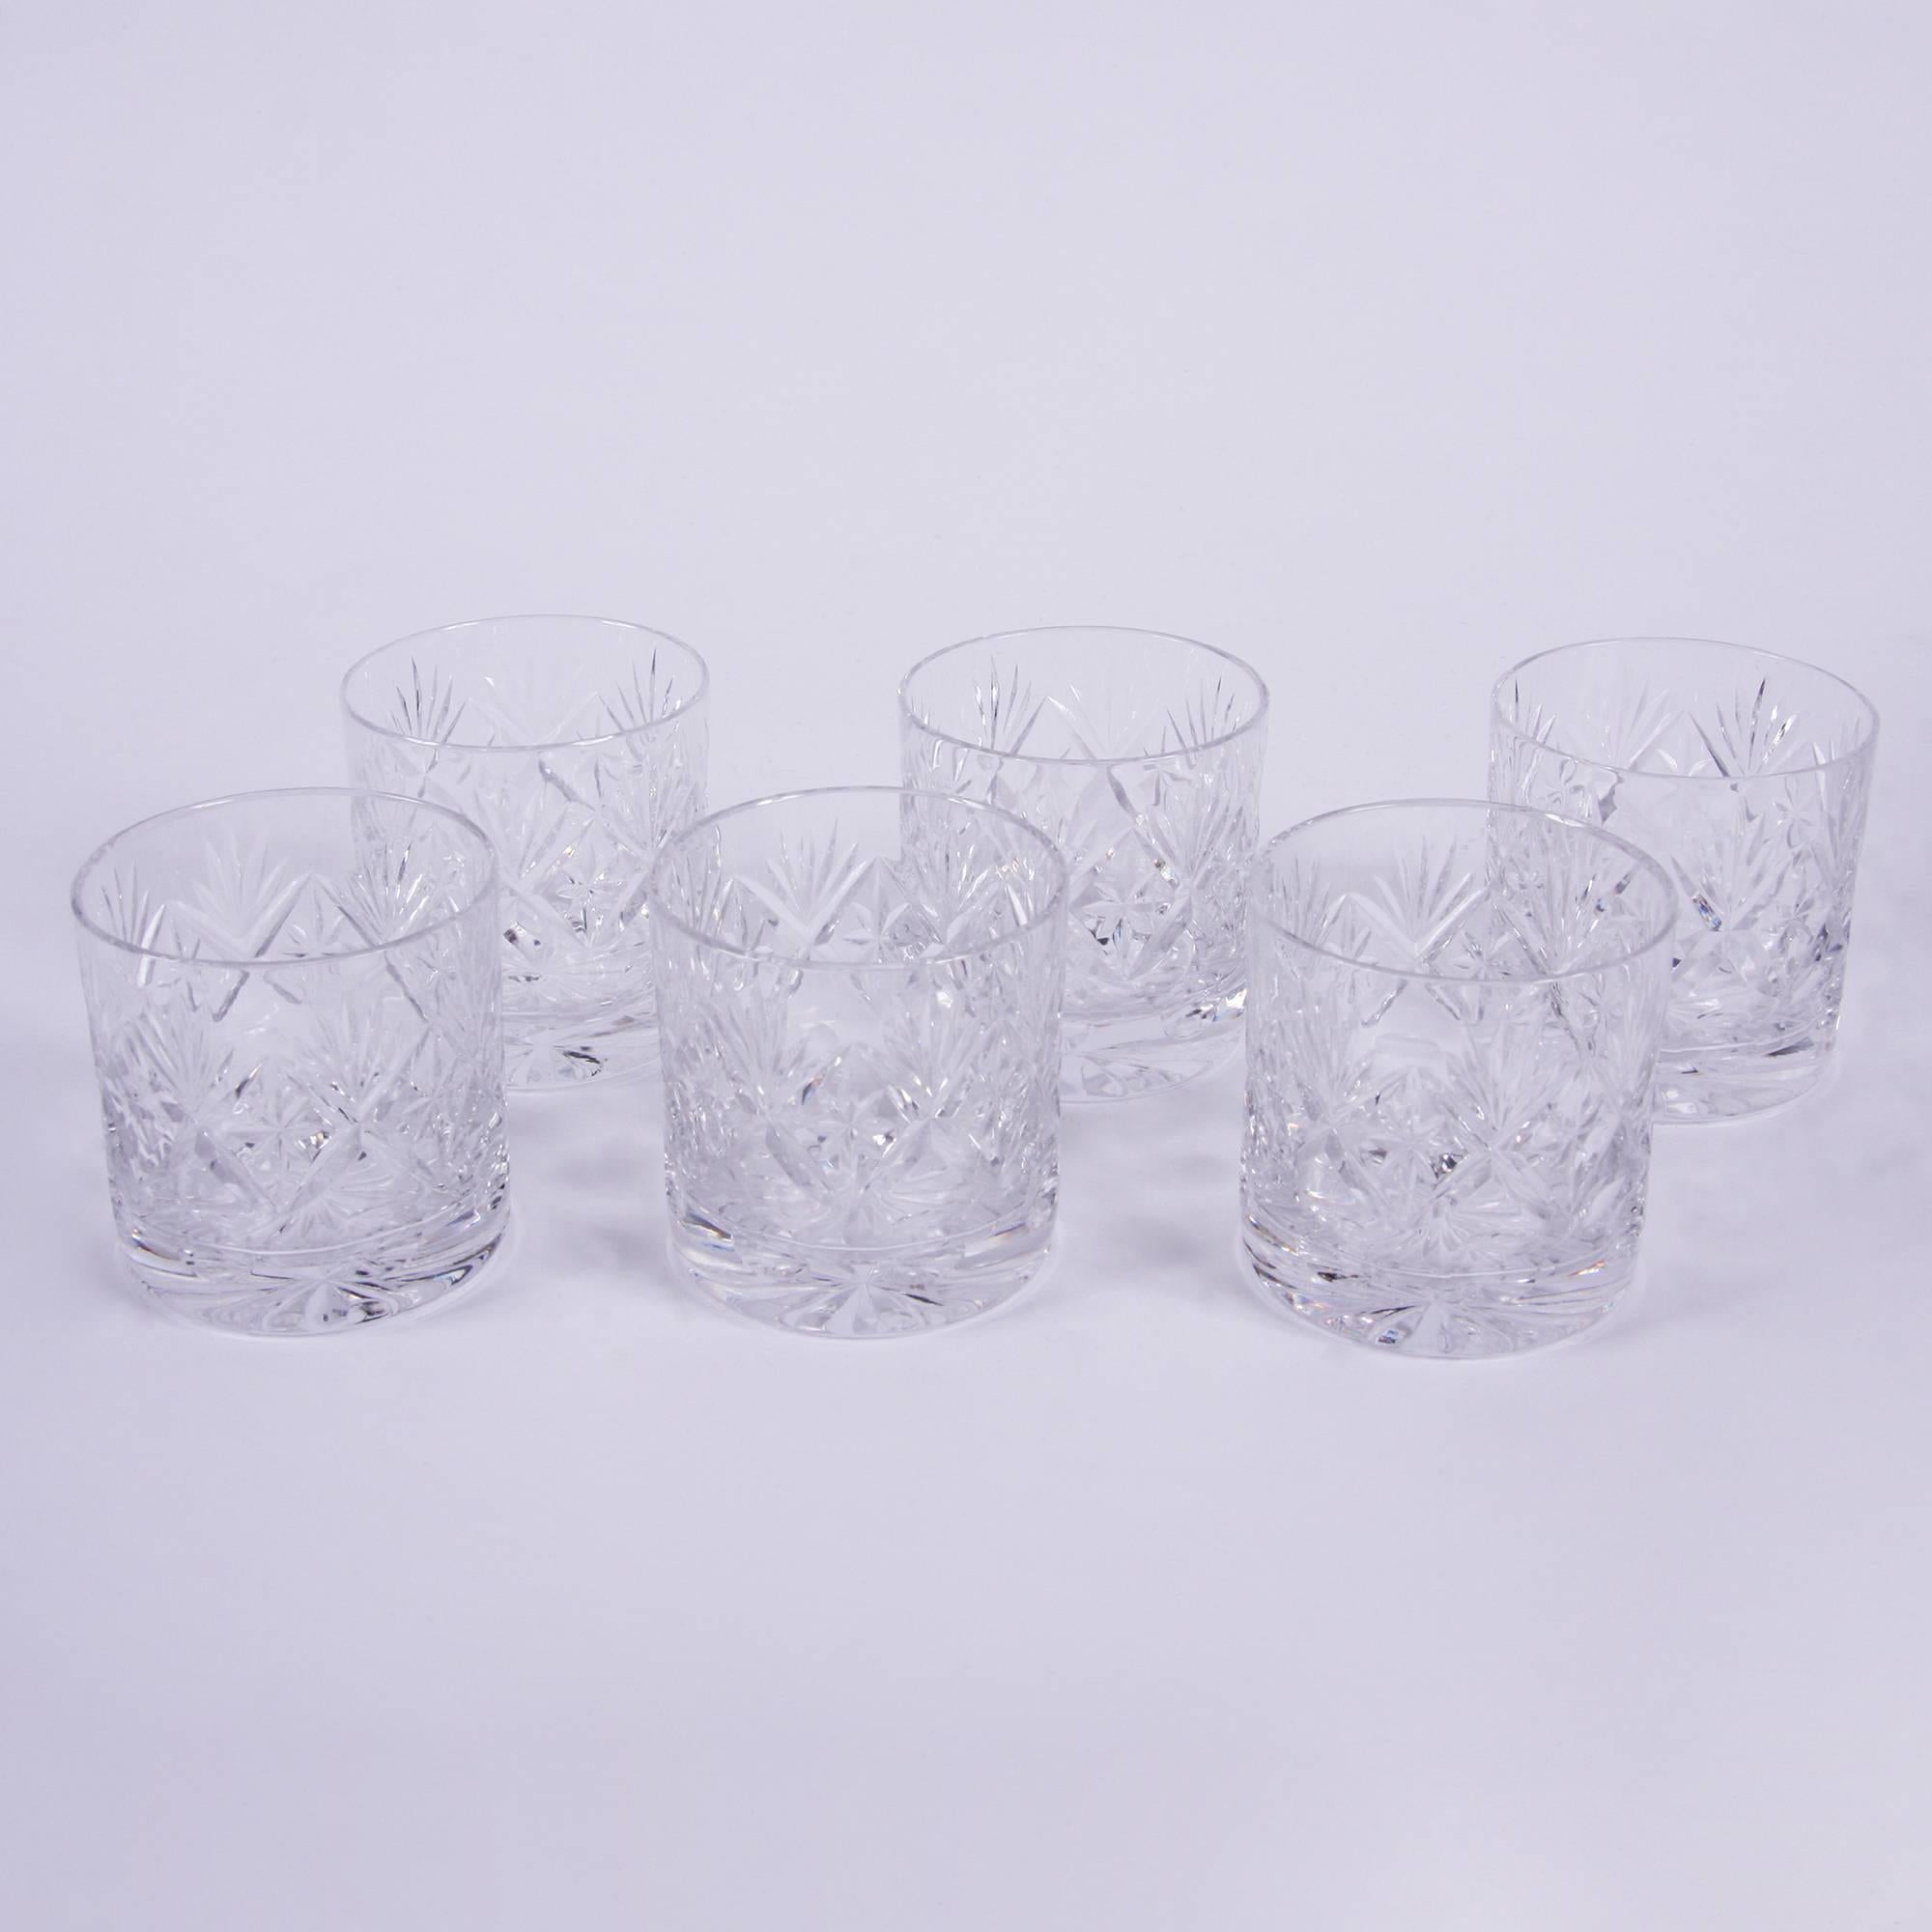 English Mid-20th century

A set of six cut-glass tumblers with a round 'window' design around the bottom. In excellent condition.